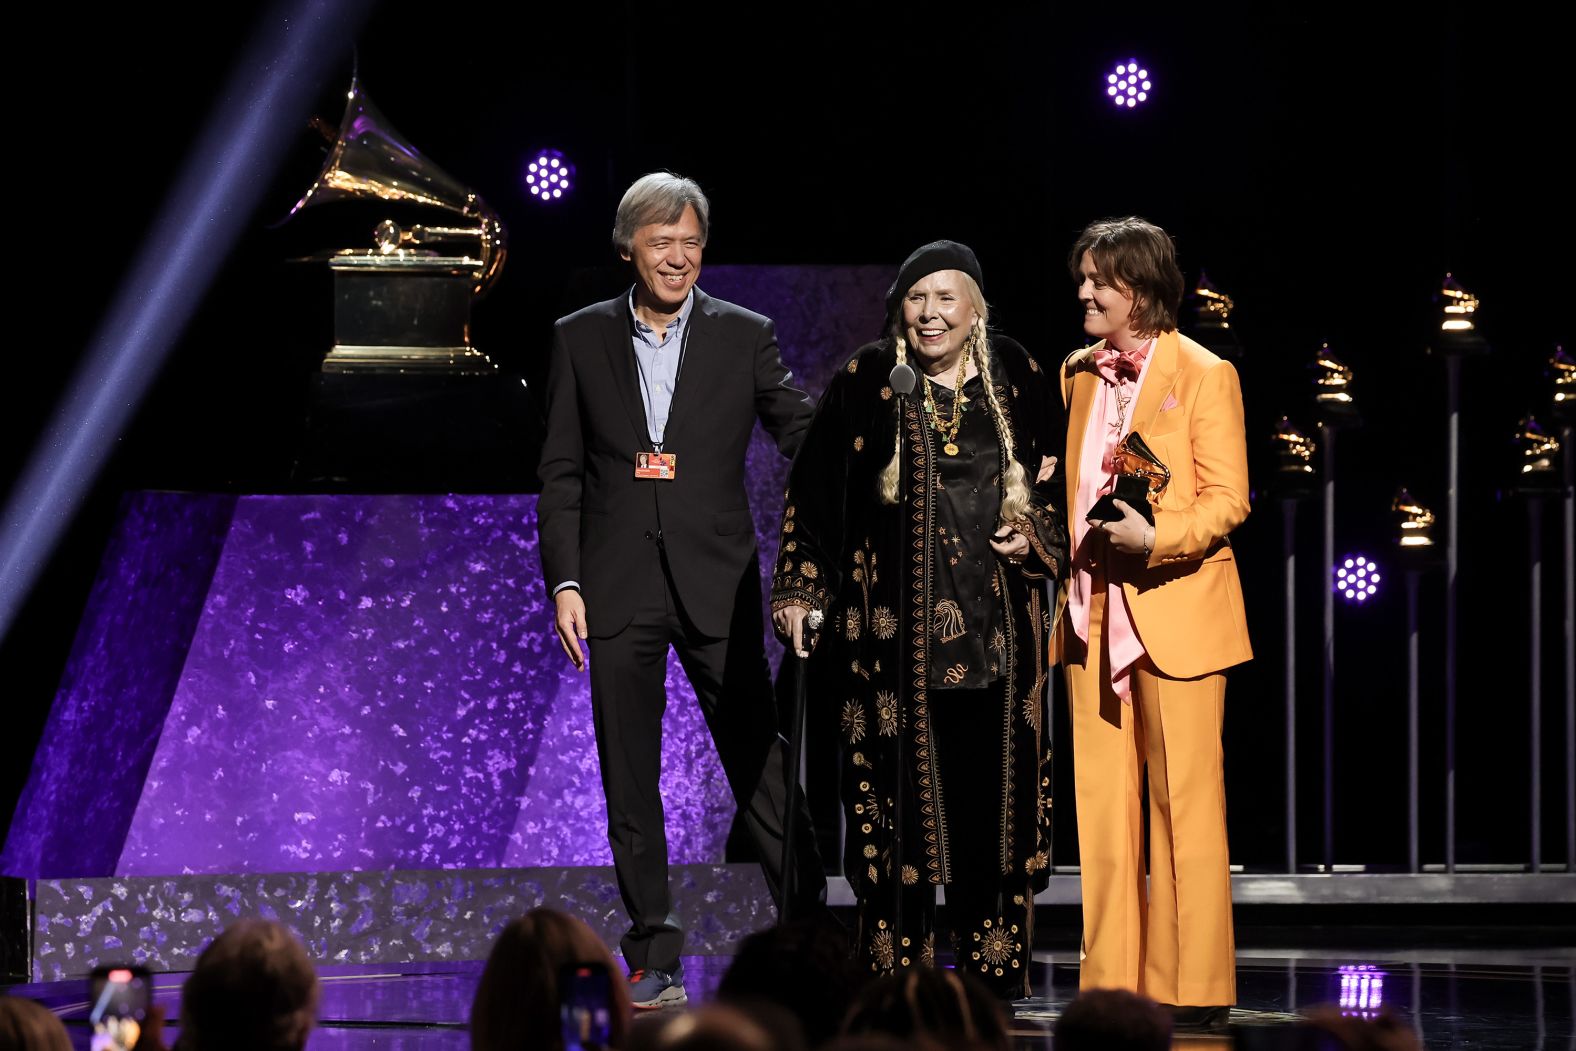 Mitchell, center, accepts the Grammy for best folk album ("Joni Mitchell at Newport") before the live show. It was Mitchell's 10th Grammy win. She also has a lifetime achievement award.